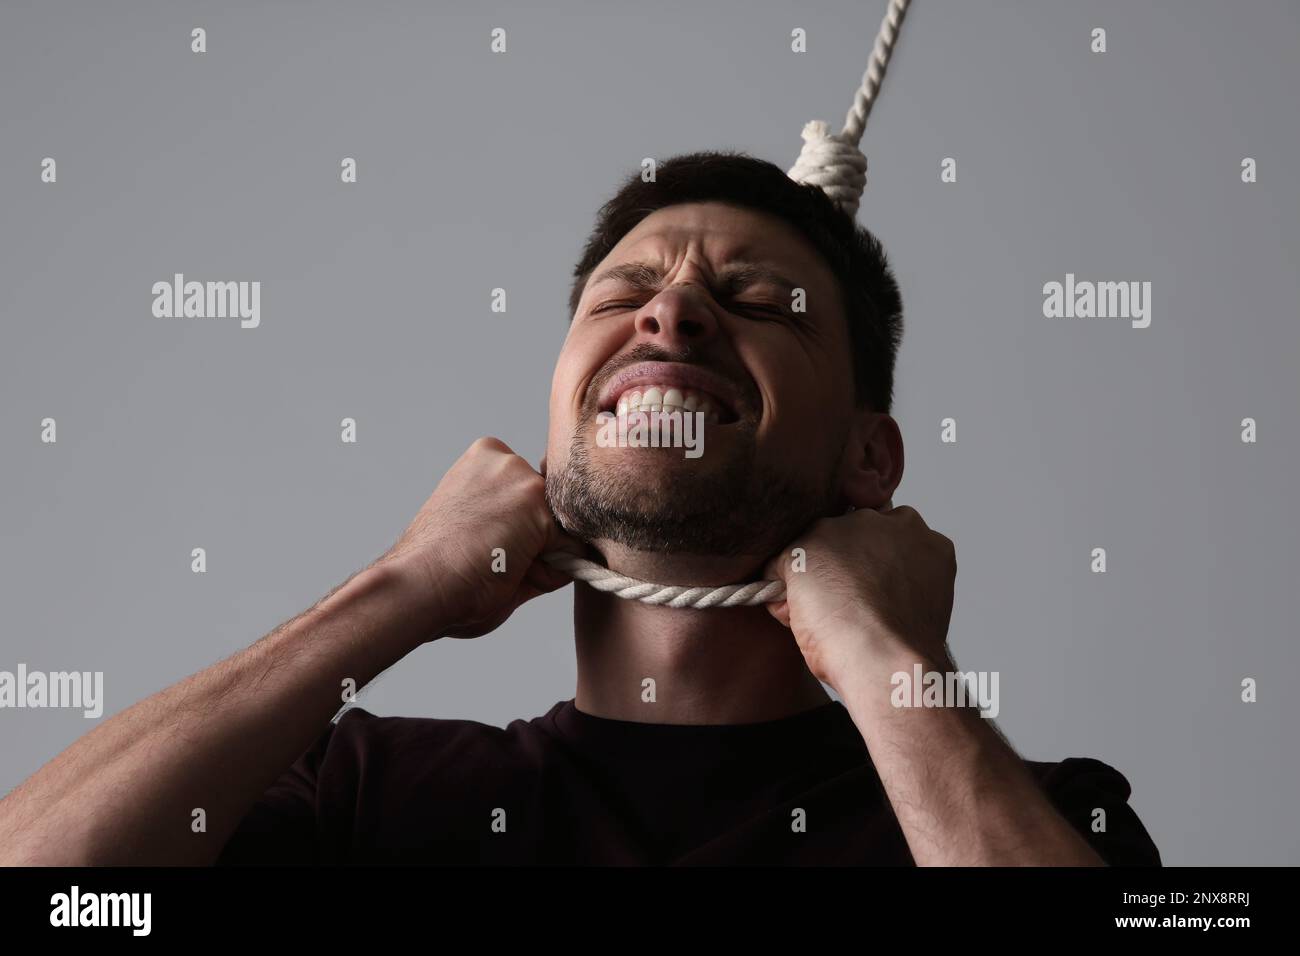 Depressed man with rope noose on neck against light grey background Stock Photo